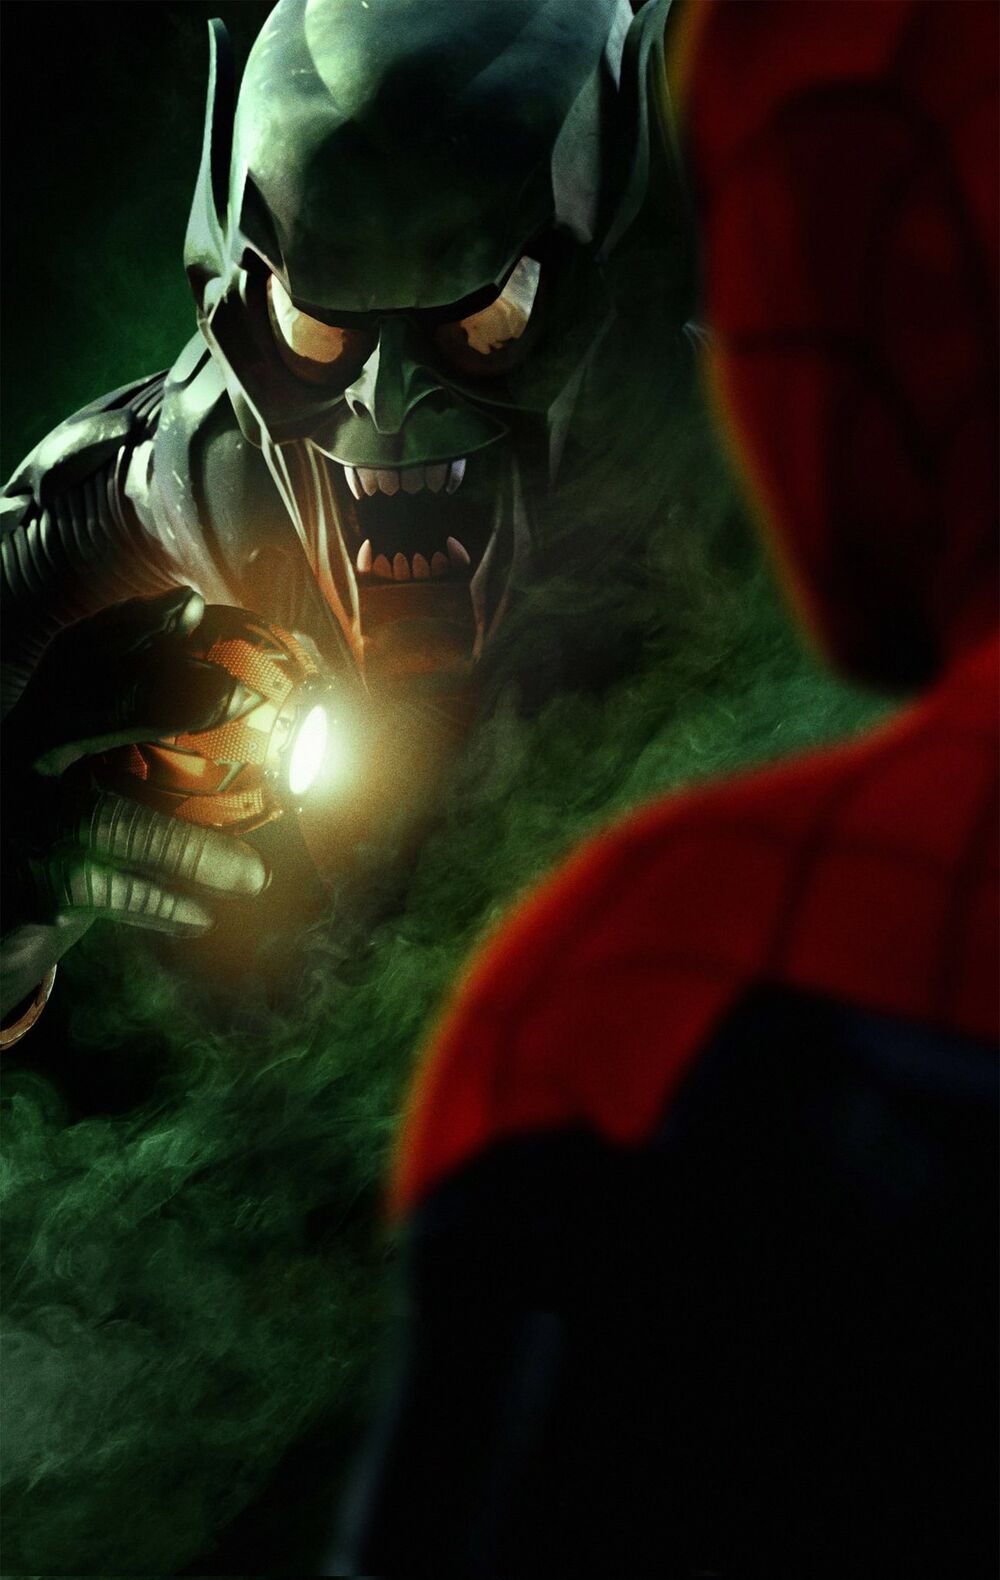 Everything You Need To Know About Marvel's Spider-Man 2 - Green